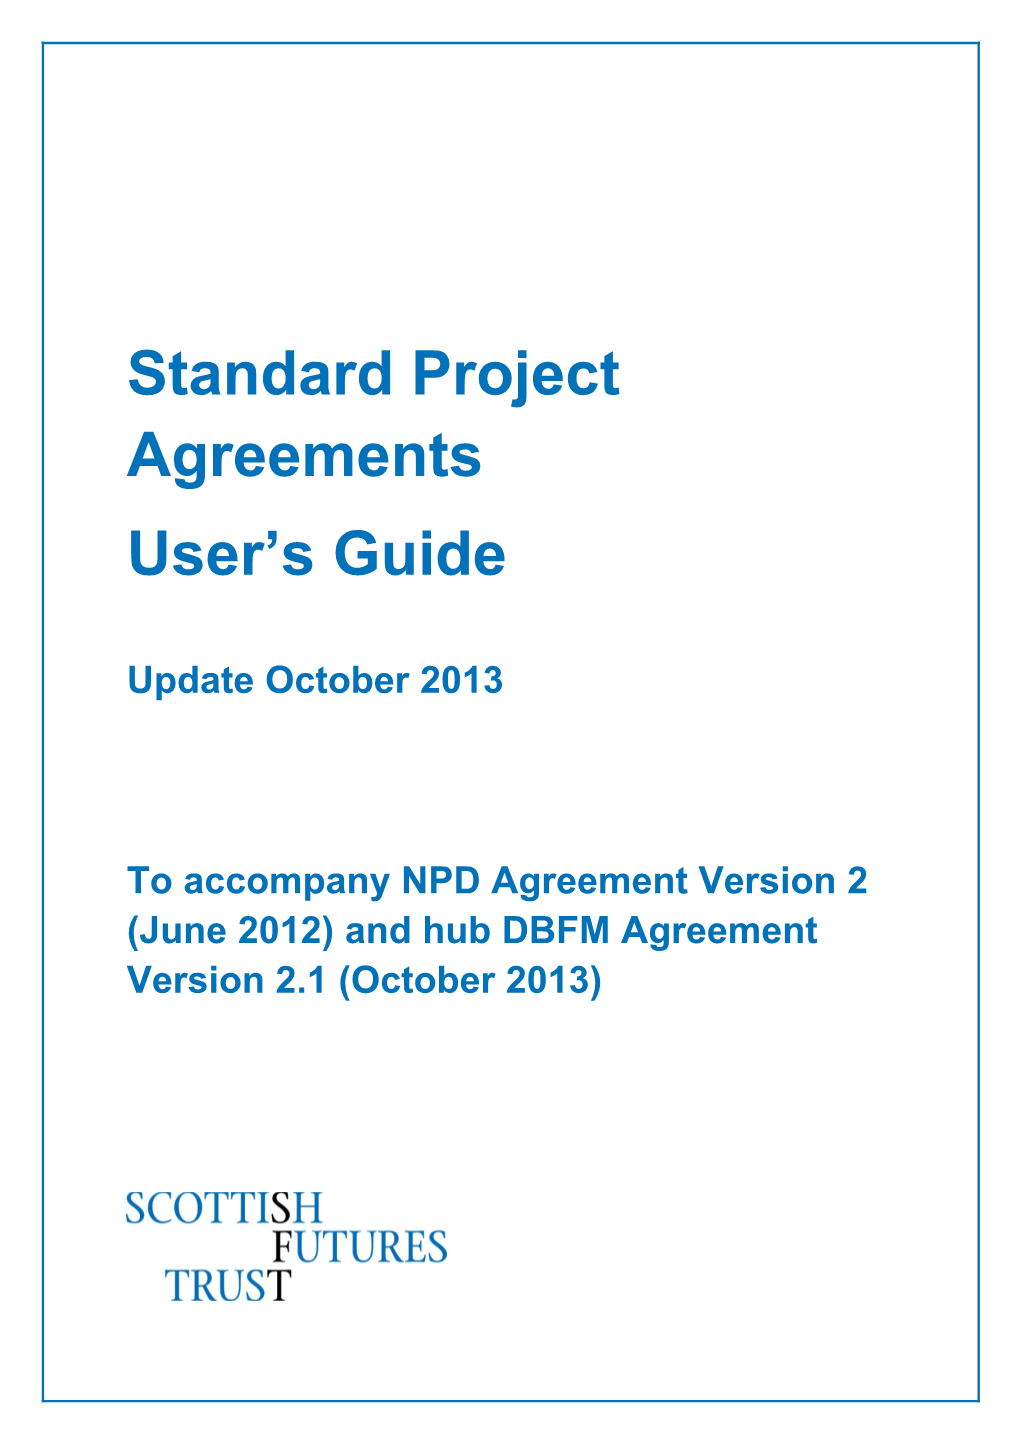 Standard Project Agreements